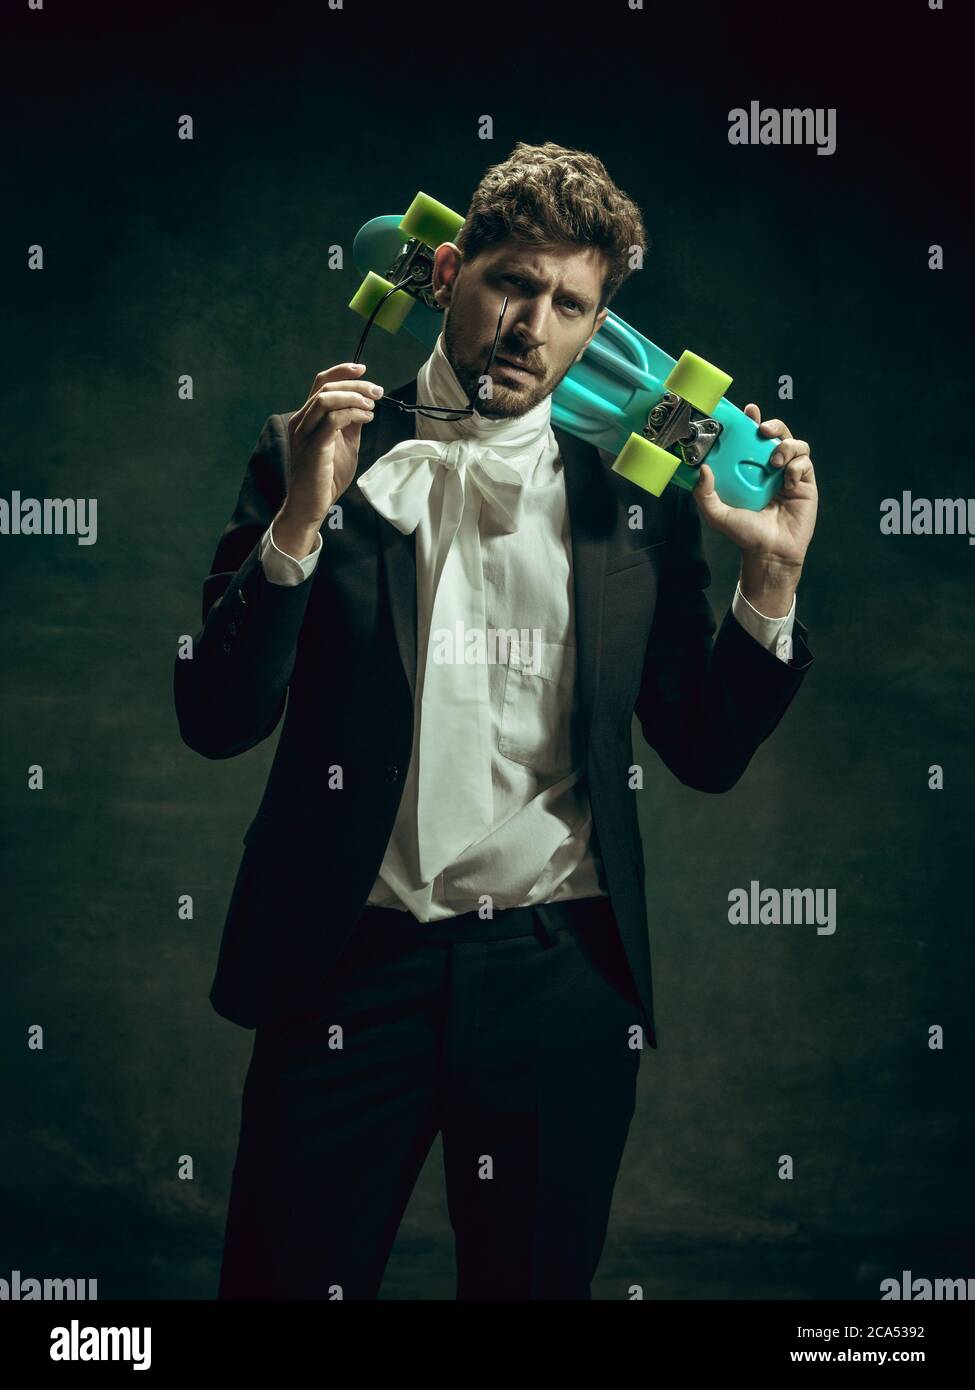 Skateboard urban style. Young man in suit as Dorian Gray isolated on dark green background. Retro style, comparison of eras concept. Beautiful male model like classic literature character, old-fashioned. Stock Photo